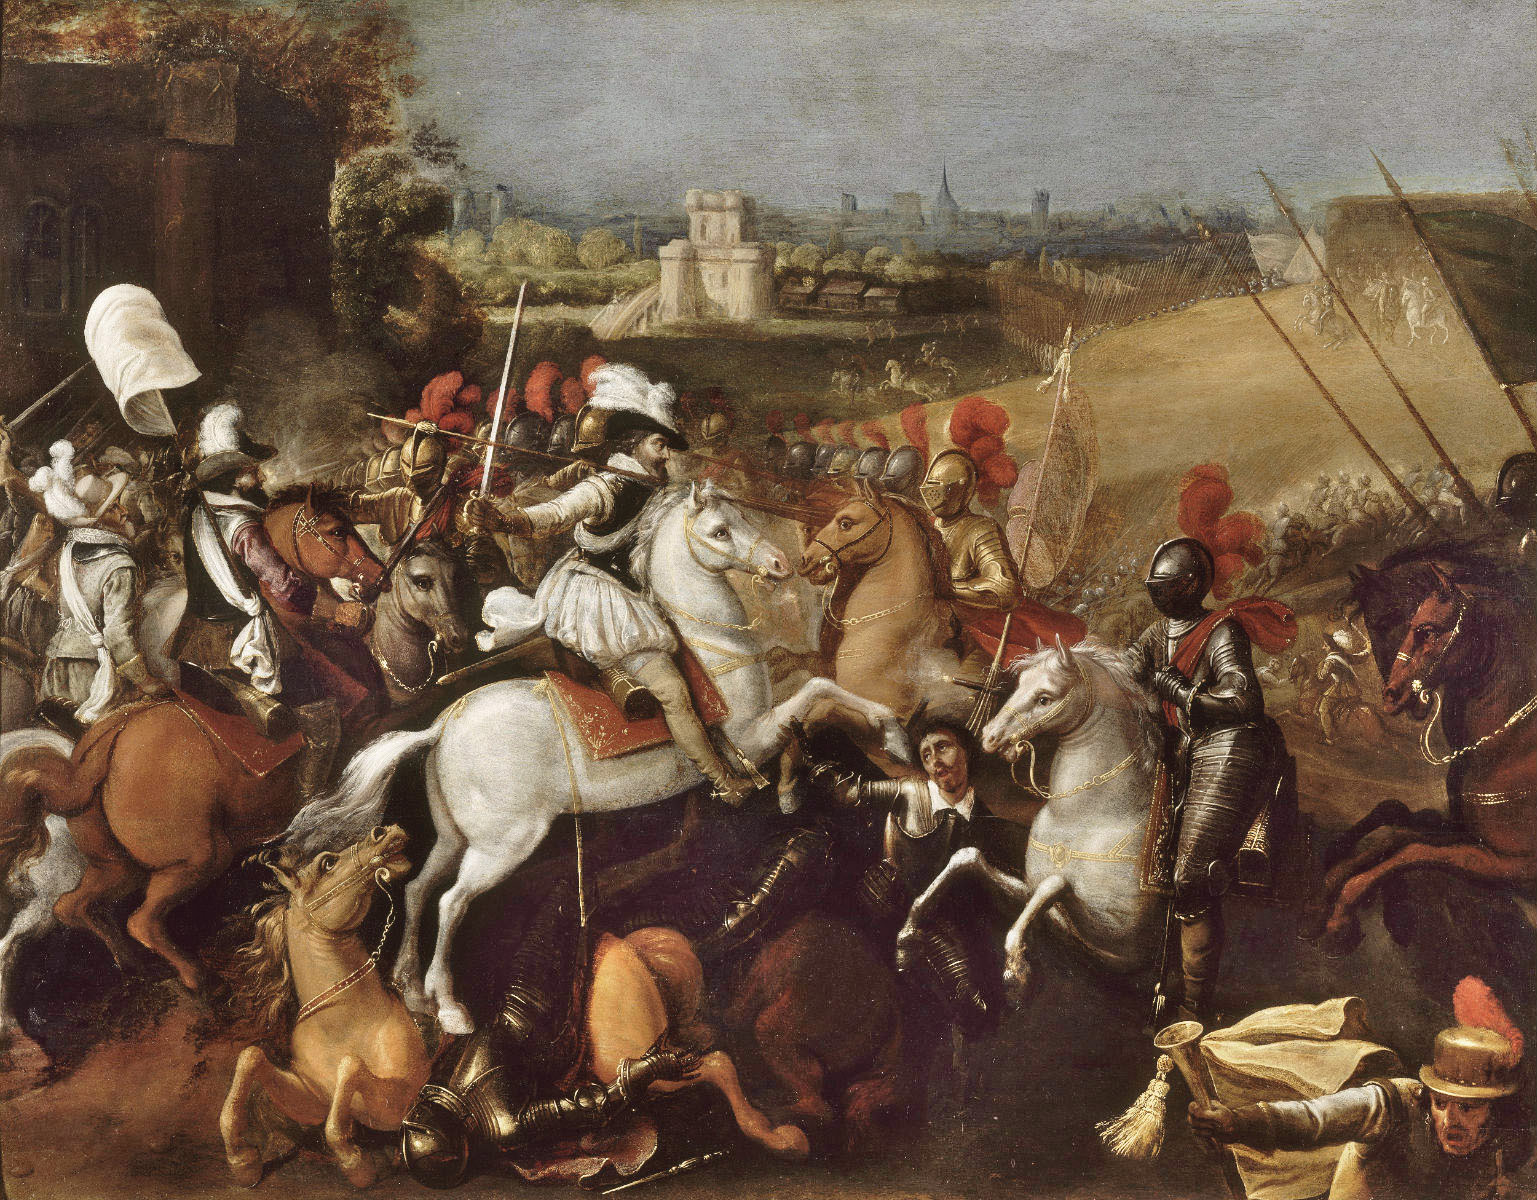 Following the assassination of Henry III in July 1589, Henry de Navarre began a long campaign of conquest against resilient Catholic opposition. He won a key victory at Arques two months later. 